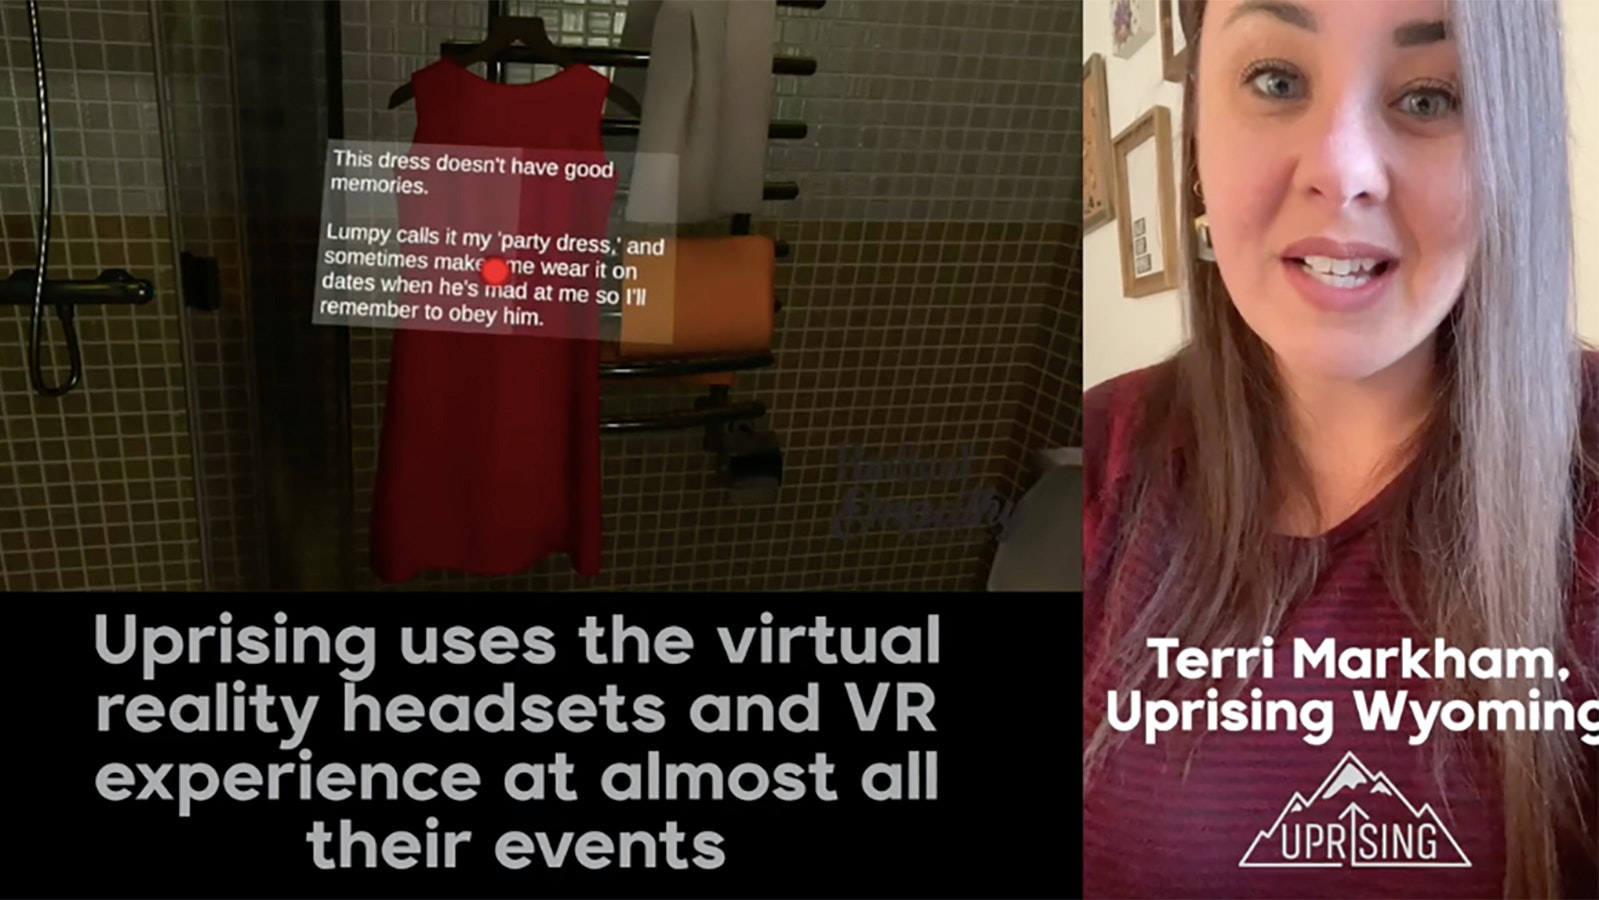 Virtual reality walks people through scenarios that simulate someone being the victim of a sex trafficker.